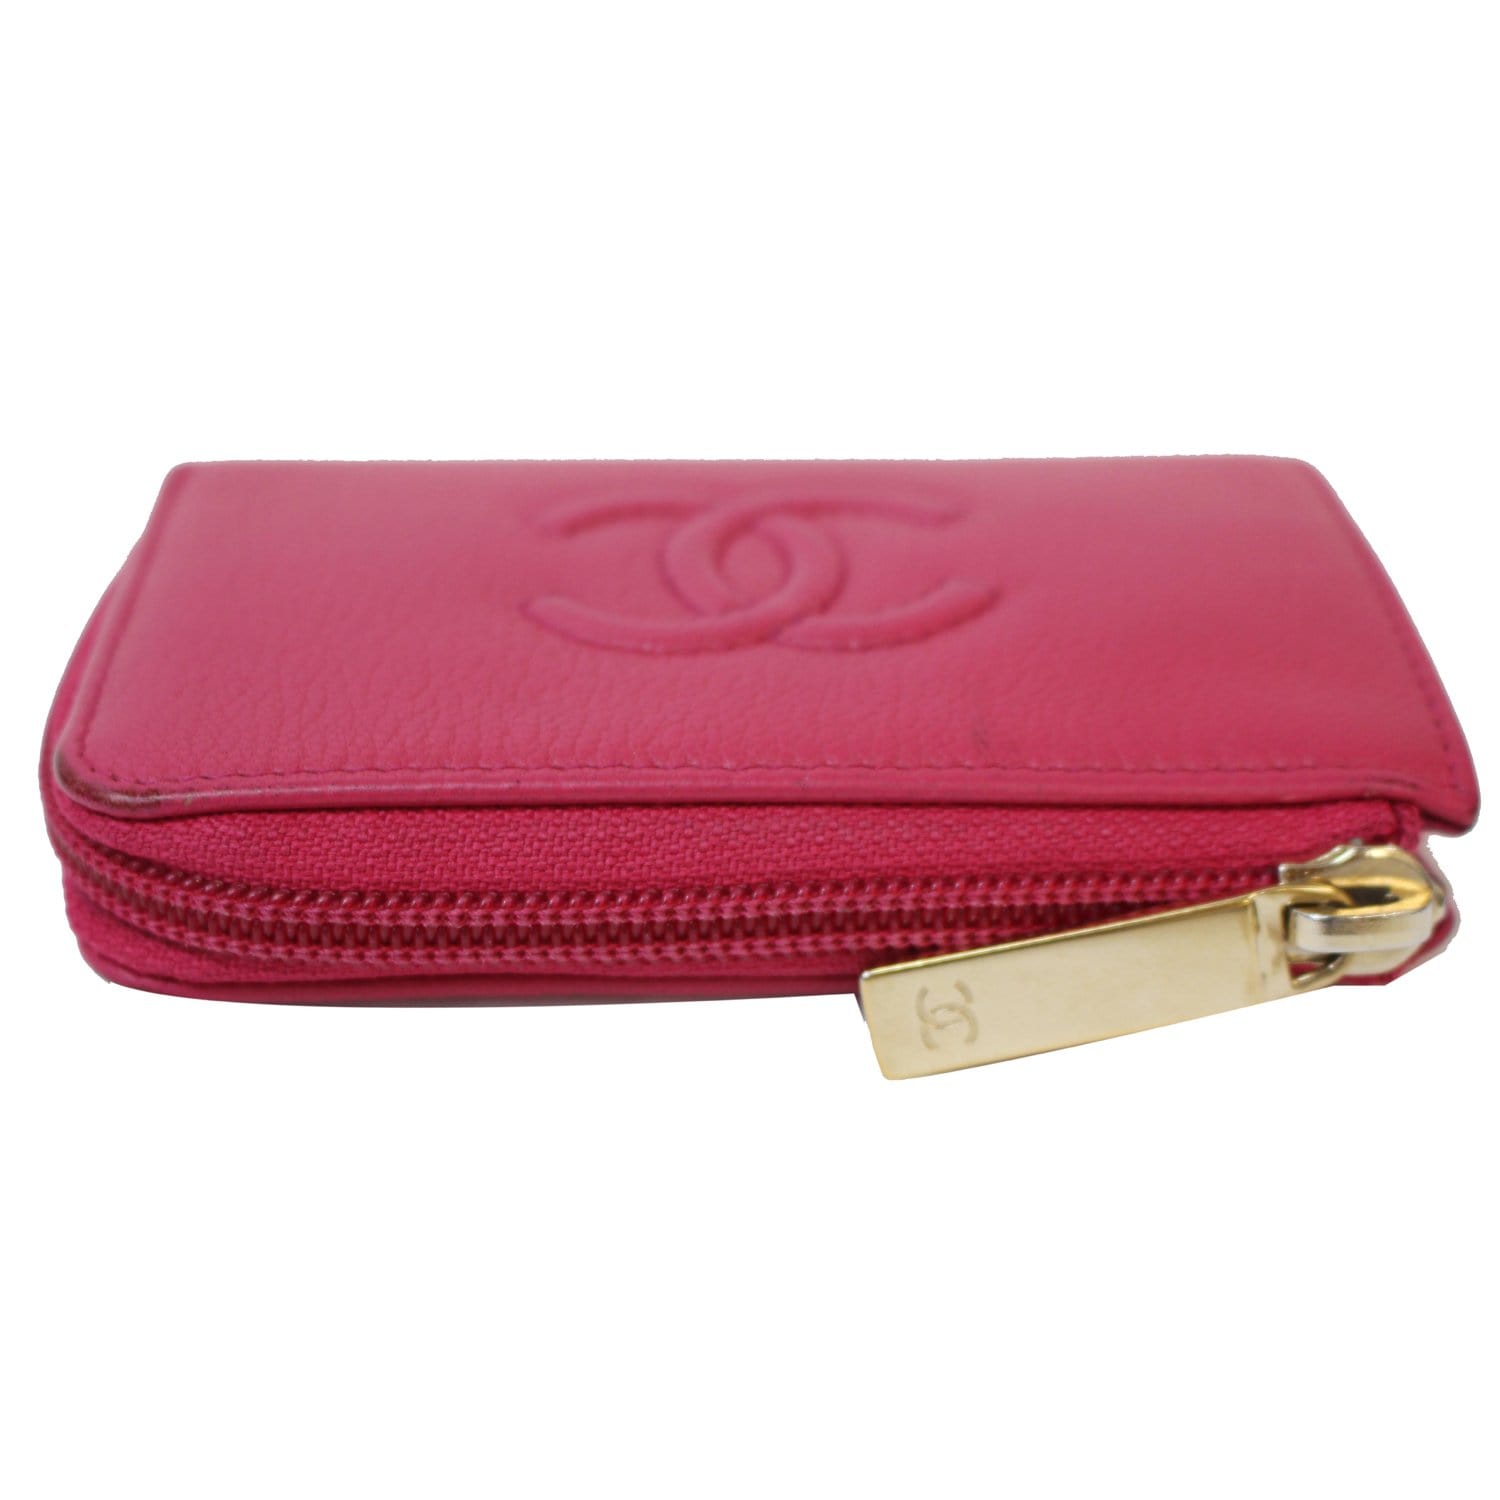 CHANEL, Bags, Chanel Key Ring Zip Wallet 22k Red Caviar